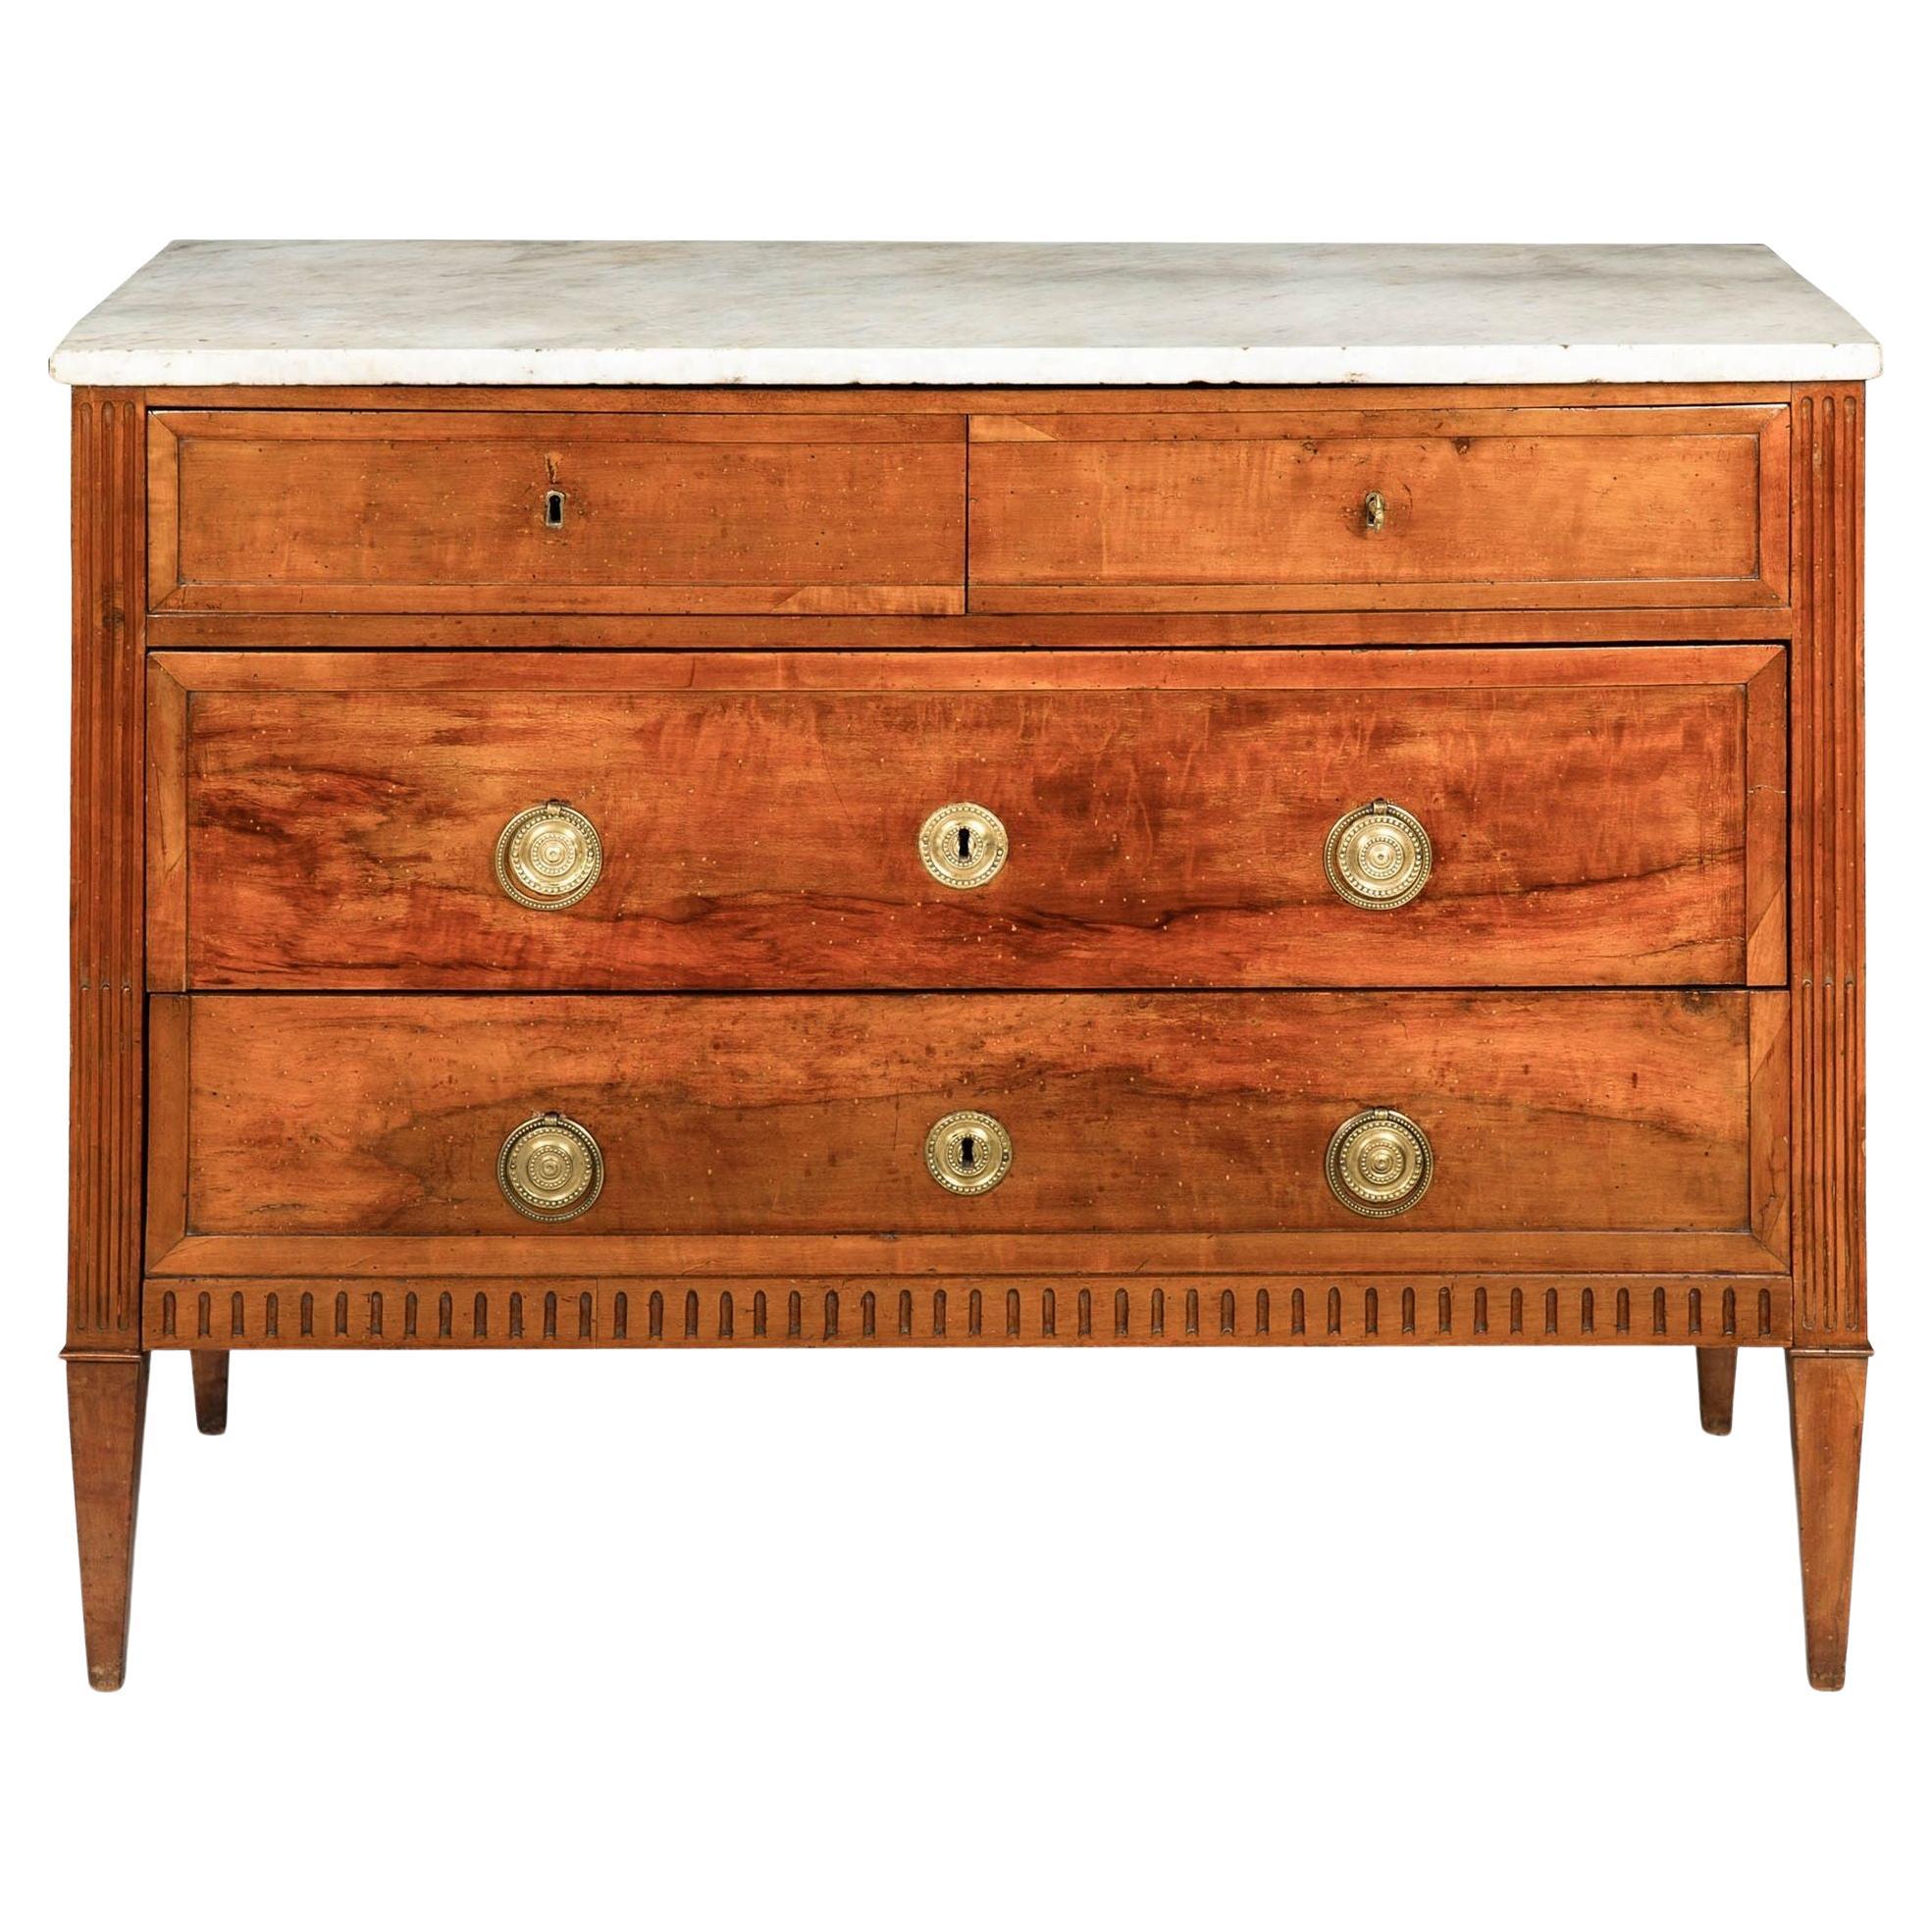 French Neoclassical Provincial Chest of Drawers Commode circa 1800